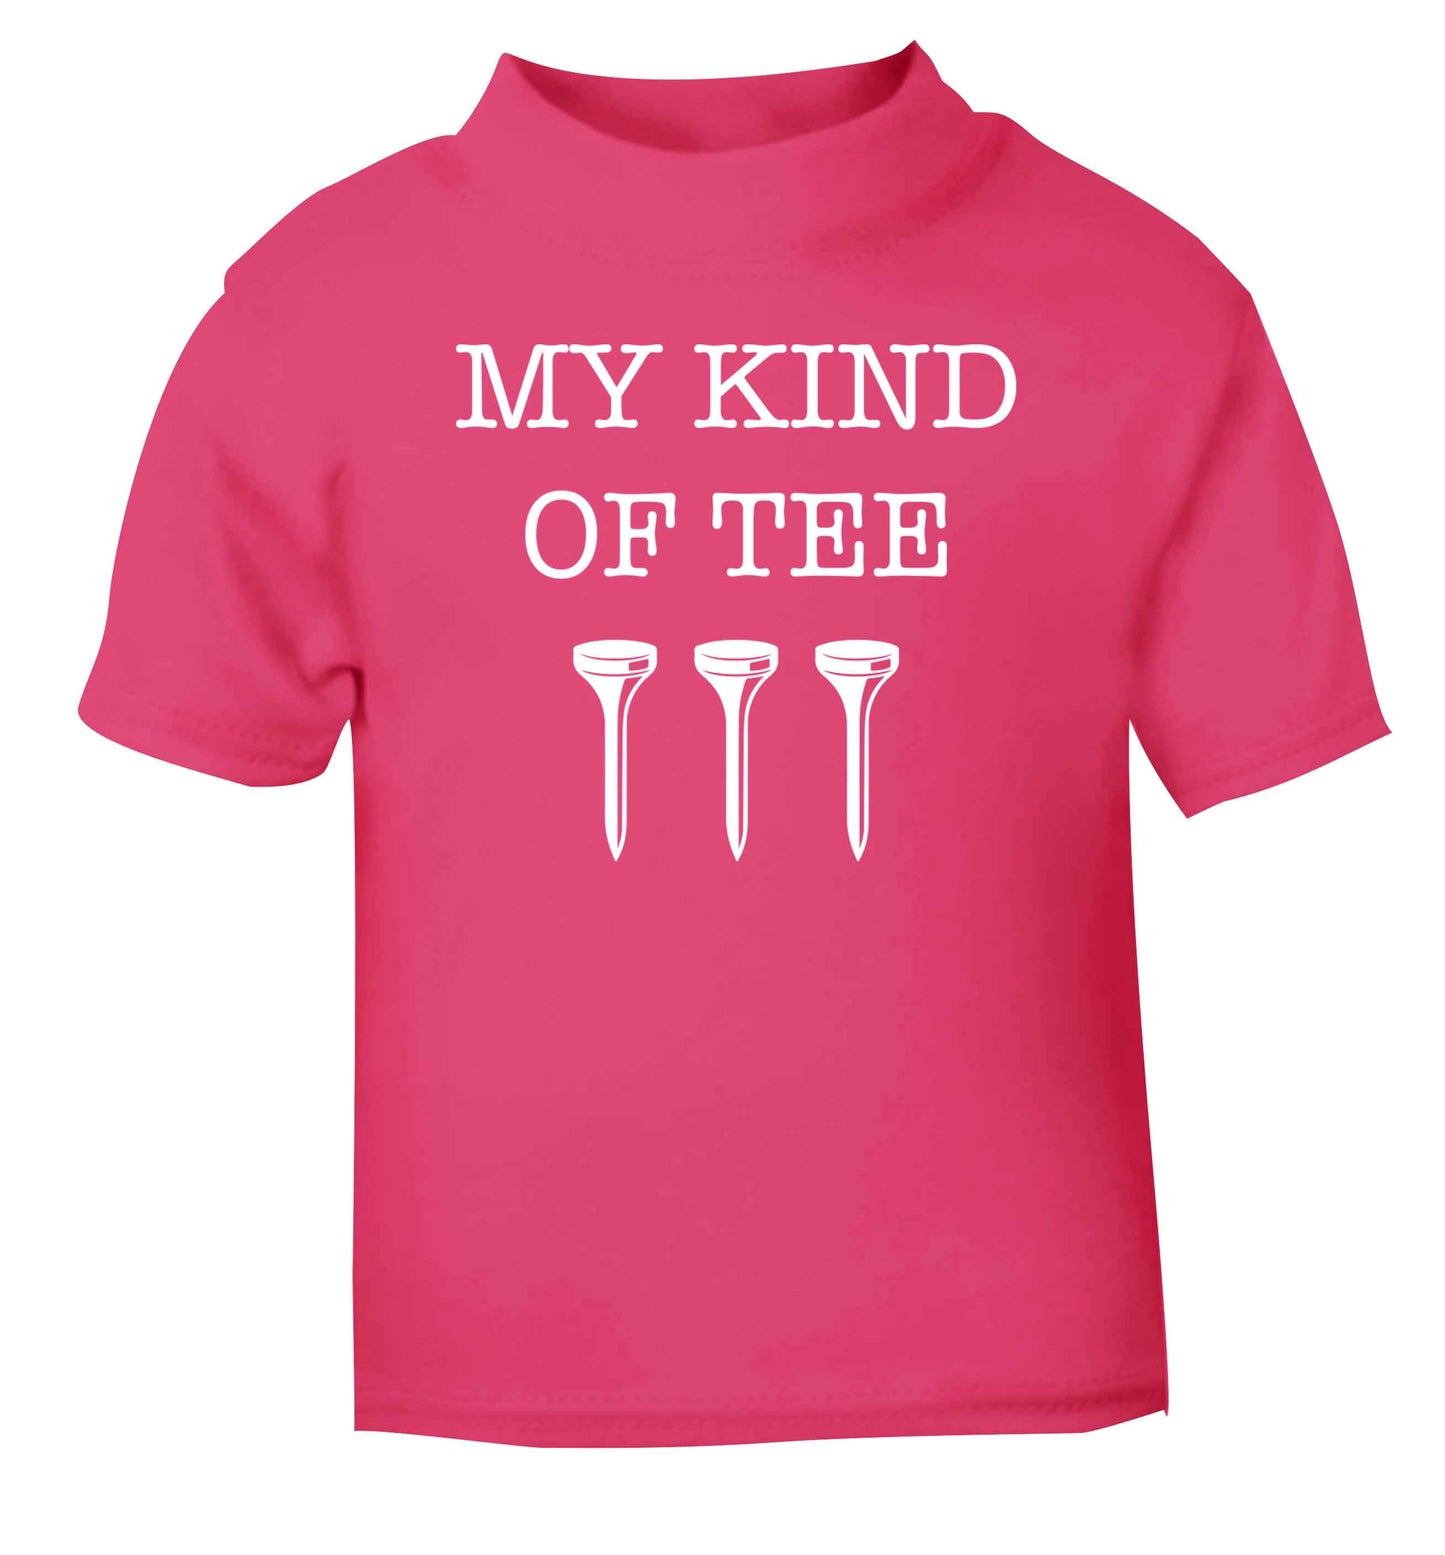 My kind of tee pink Baby Toddler Tshirt 2 Years